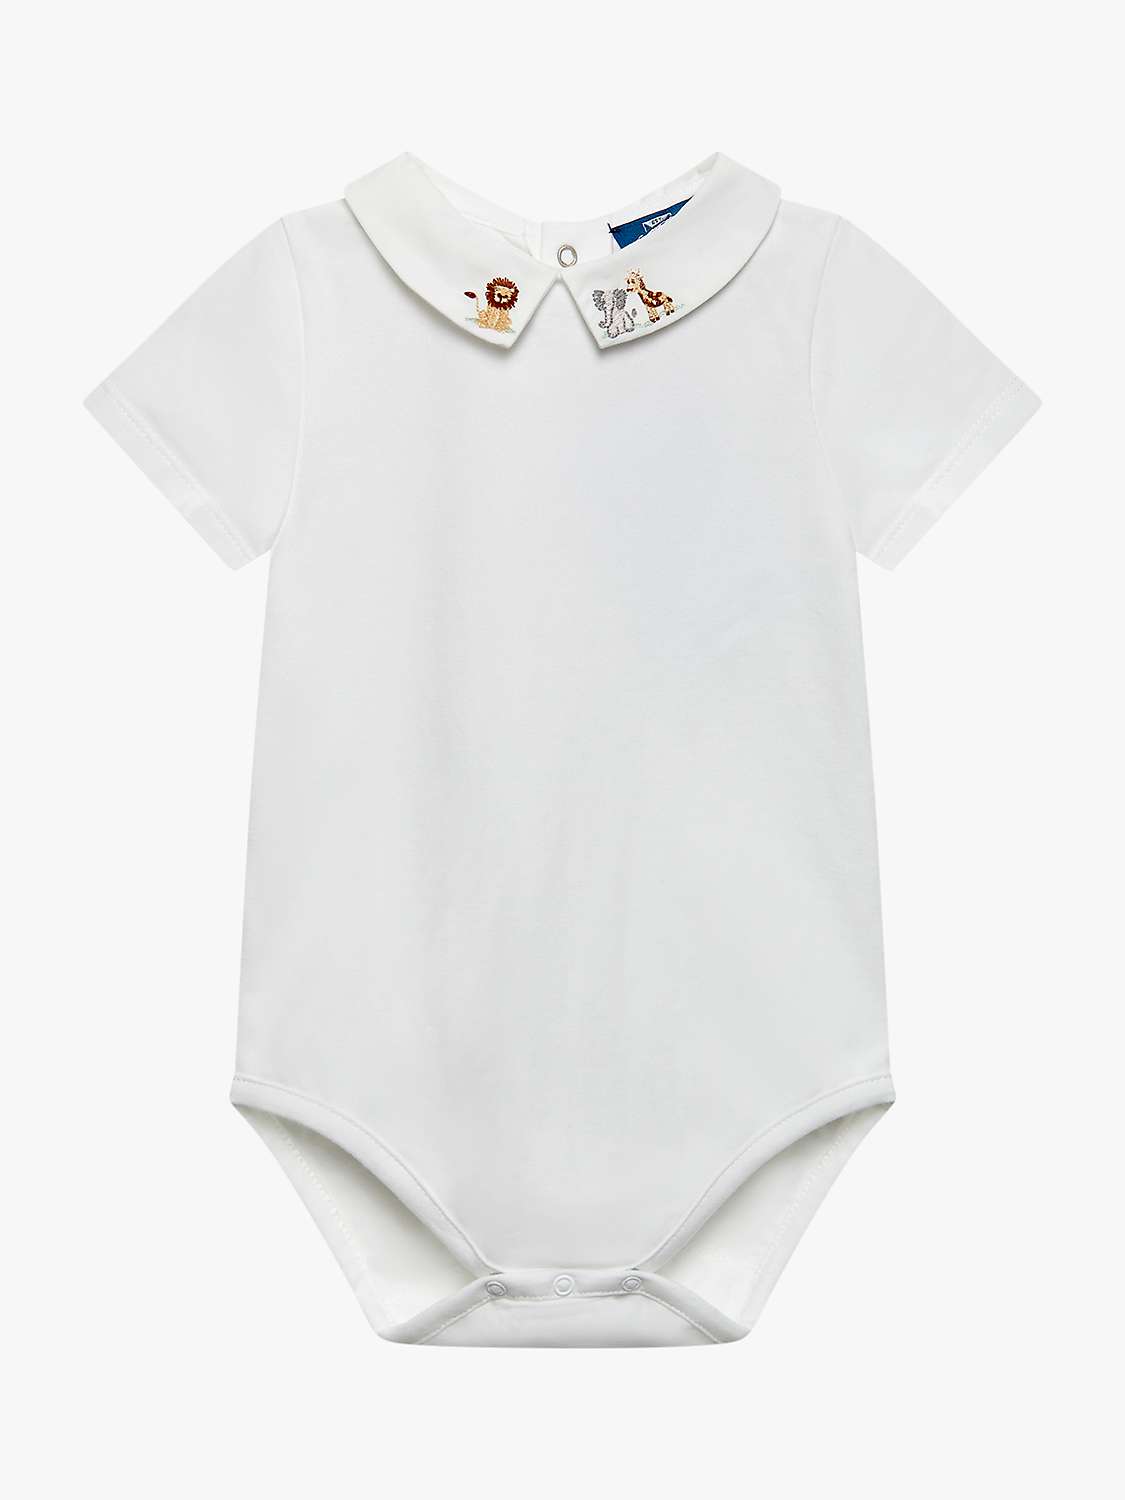 Buy Trotters Baby Augustus & Friends Jersey Bodysuit, White Online at johnlewis.com